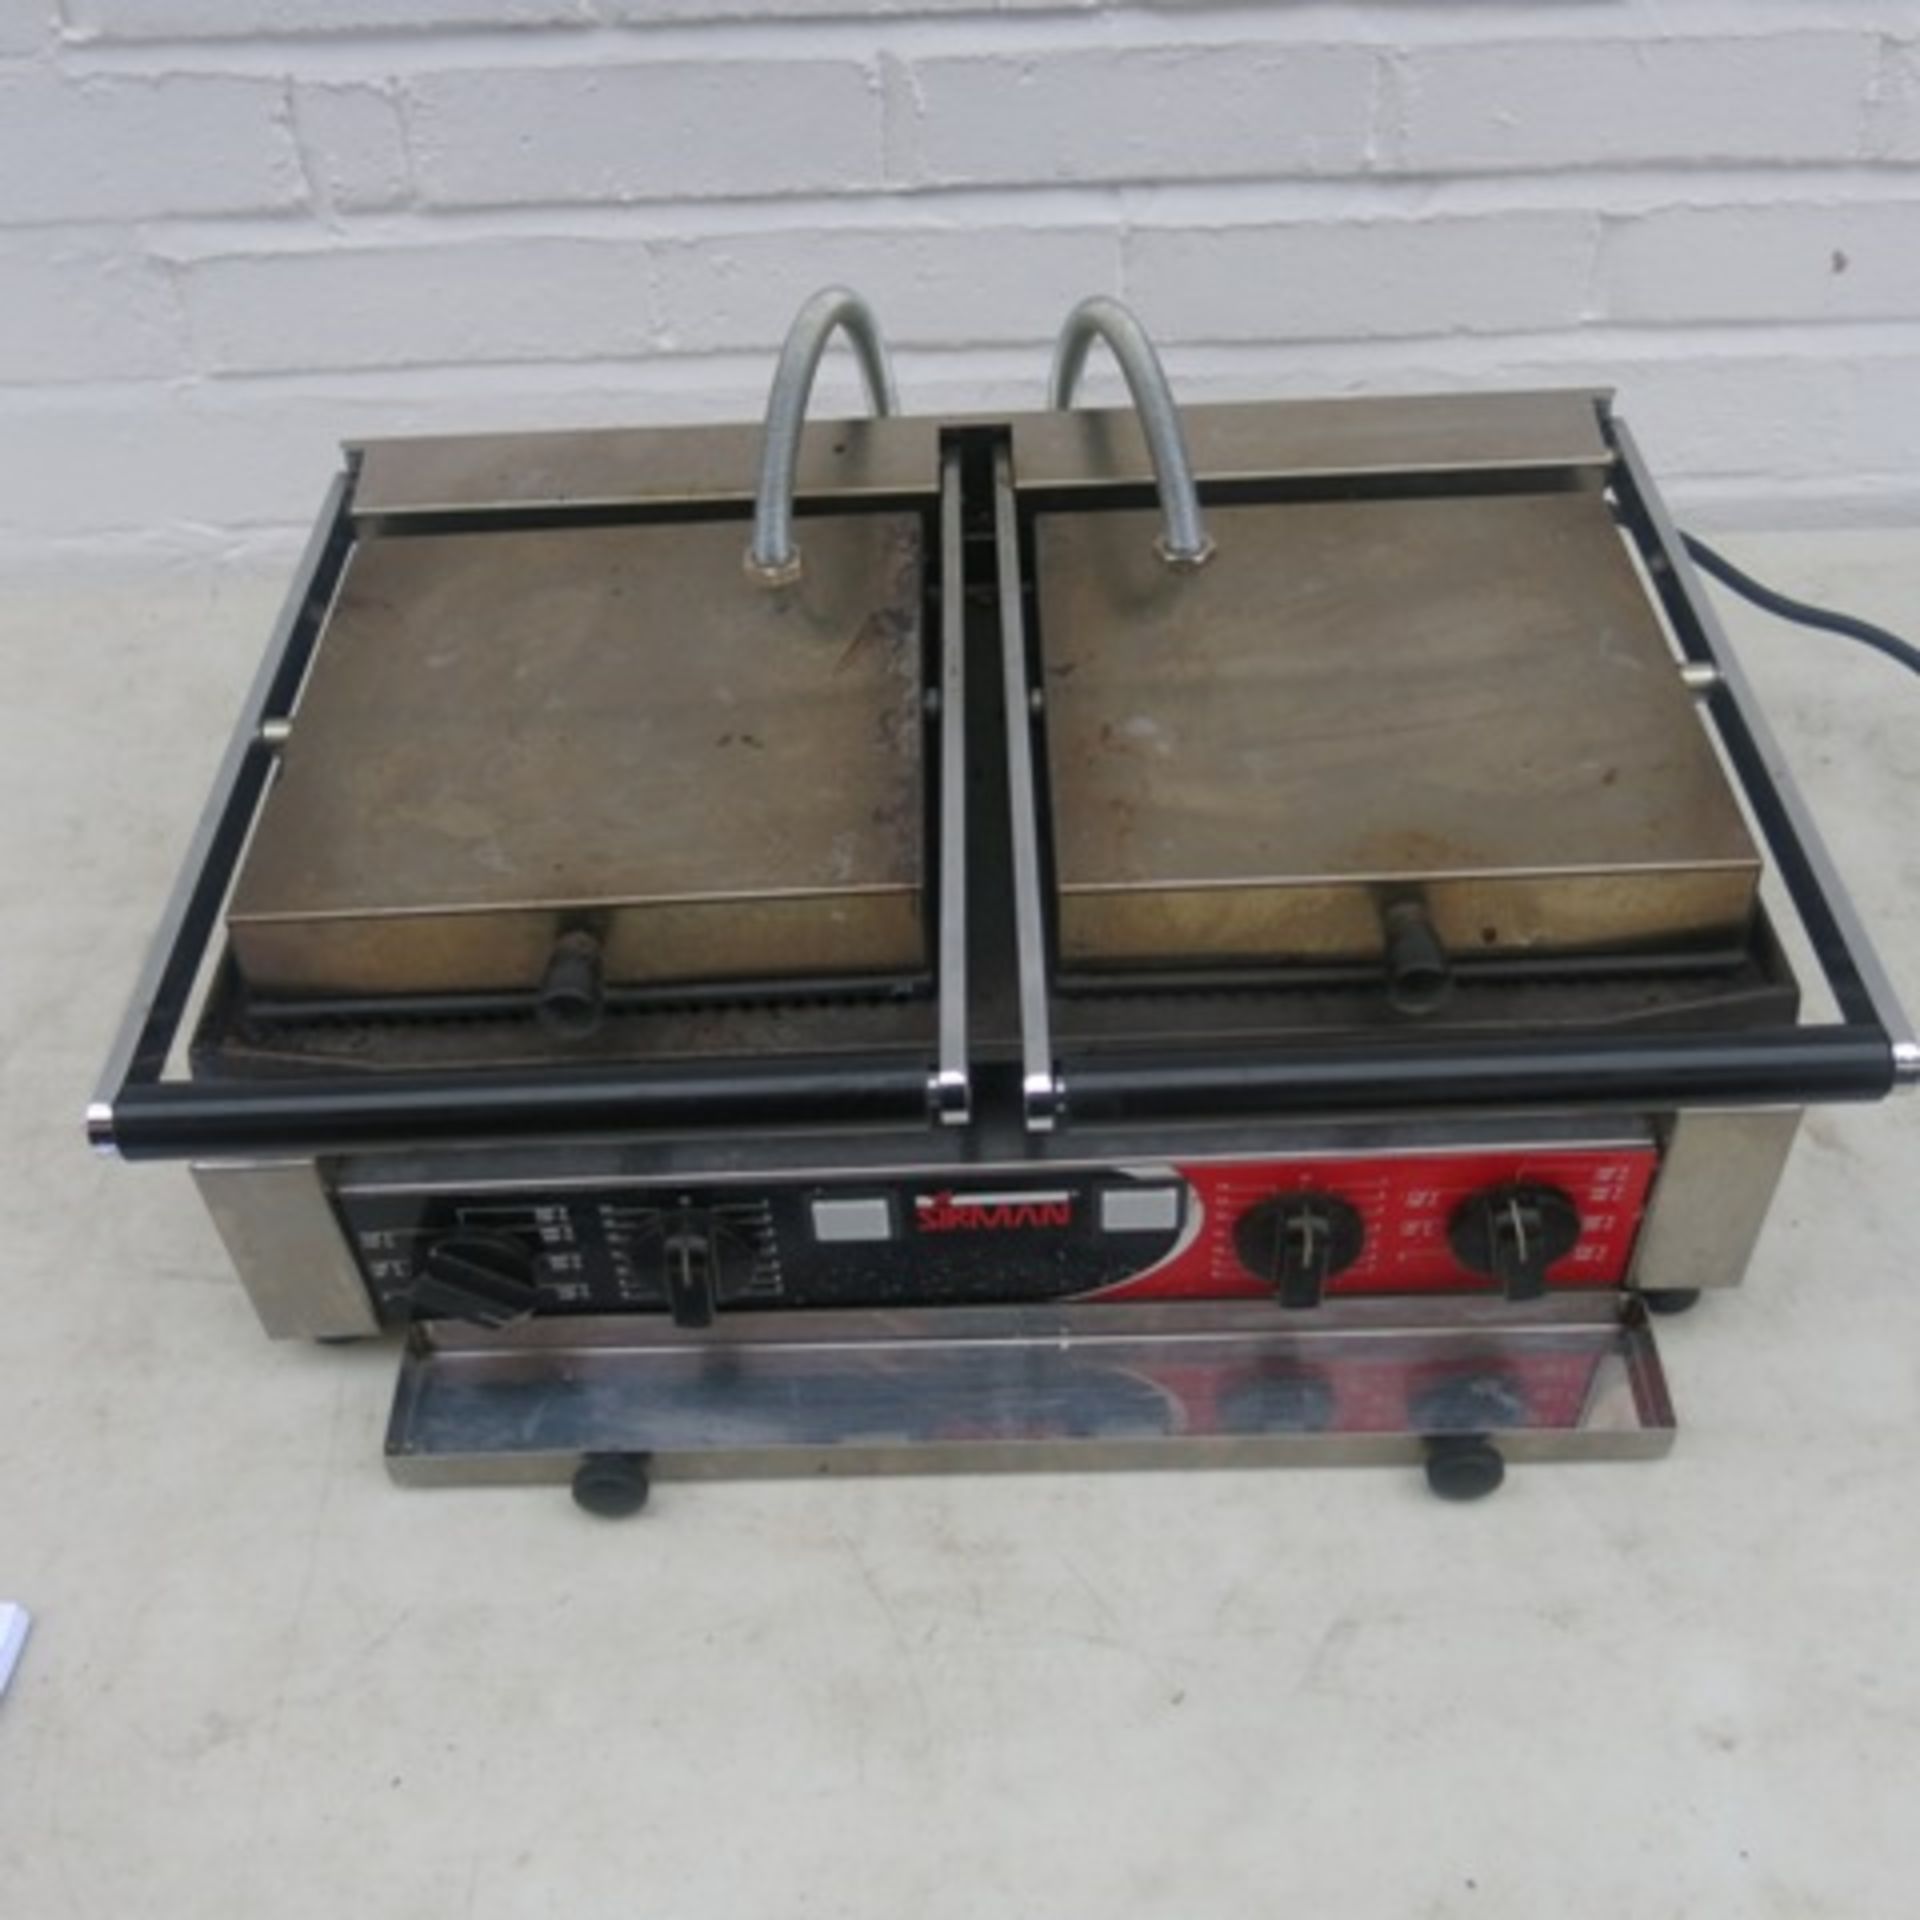 Sirman Stainless Steel Commercial Twin Panini Maker, Model PDRR/RR. Comes with Instruction Manual - Image 4 of 6